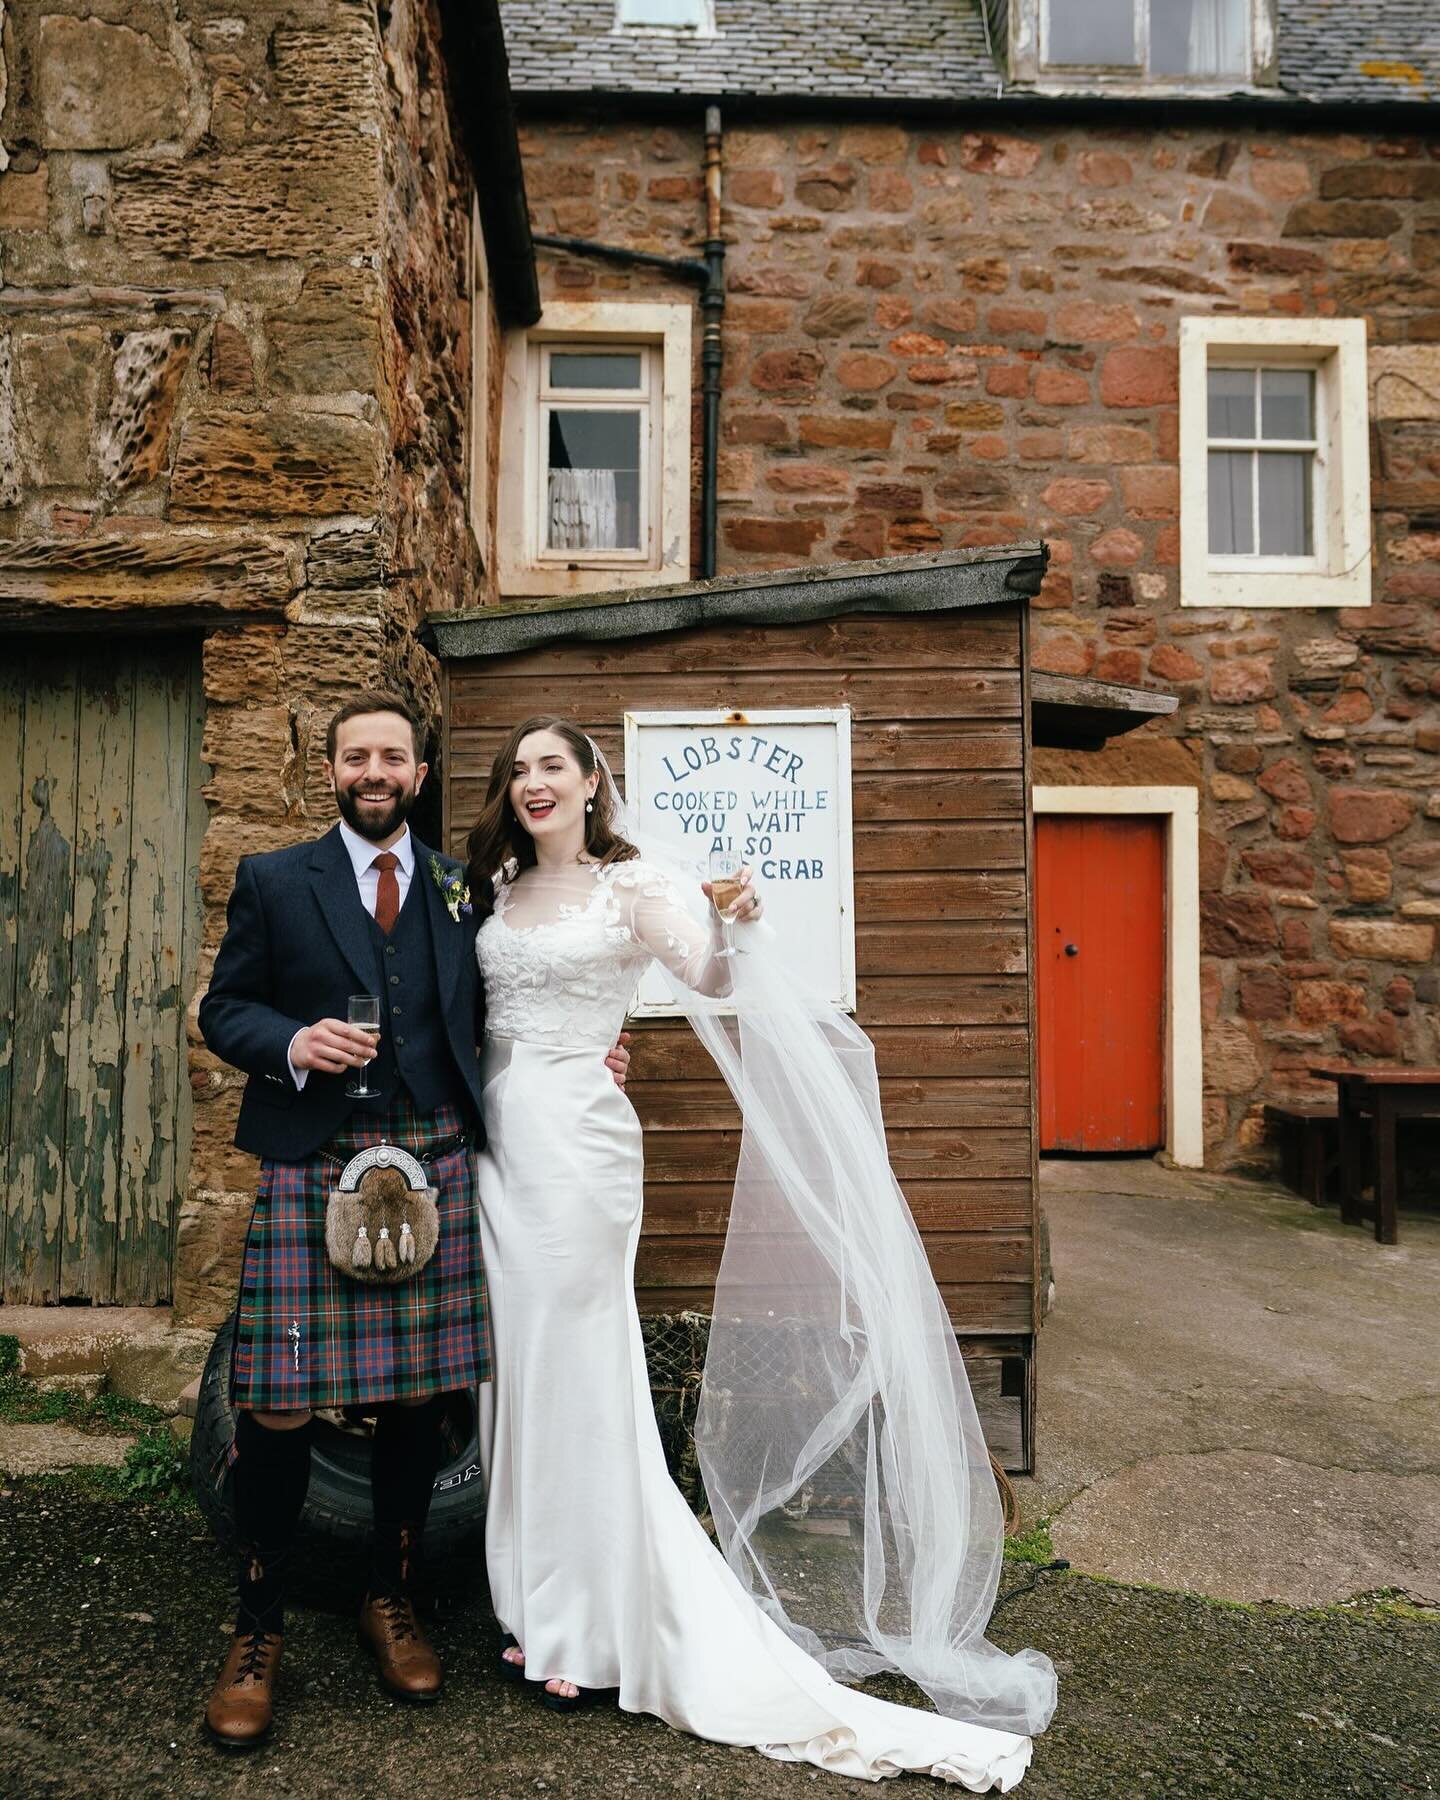 H A P P Y  A N N I V E R S A R Y !
Today marks one year since Jo &amp; Chris were married at the gorgeous @thecowshedcrail 🎉
.
I loved the decor for this one, with all the hanging stars and the gorgeous florals (you can see more of their gallery on 